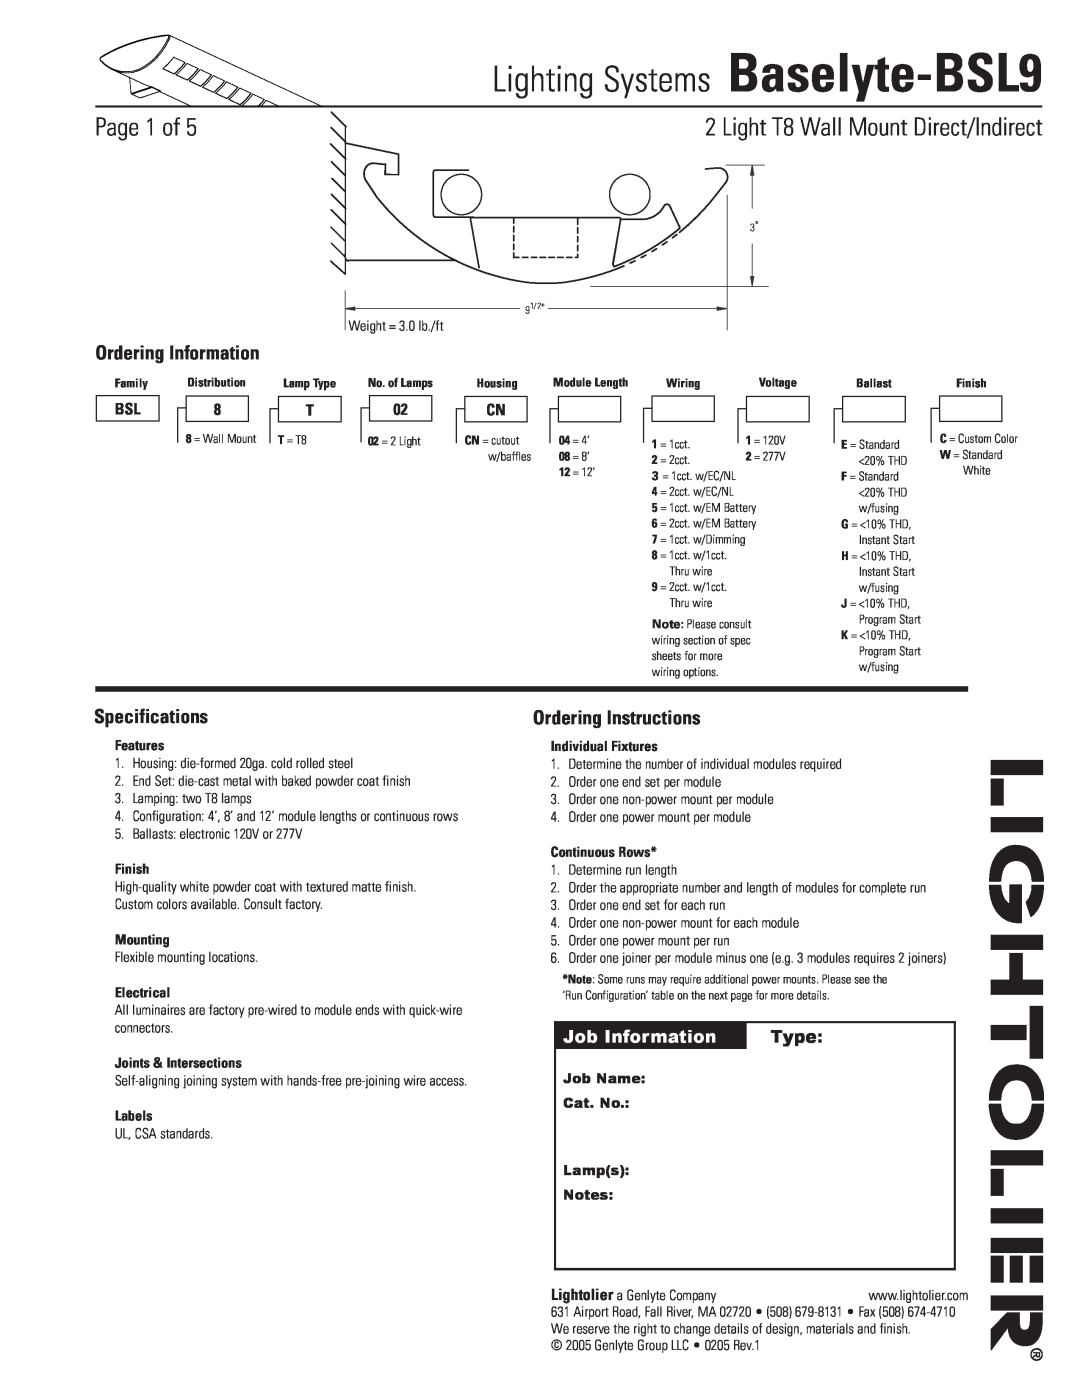 Lightolier specifications Lighting Systems Baselyte-BSL9, Page  of, Light T8 Wall Mount Direct/Indirect, Type, Finish 